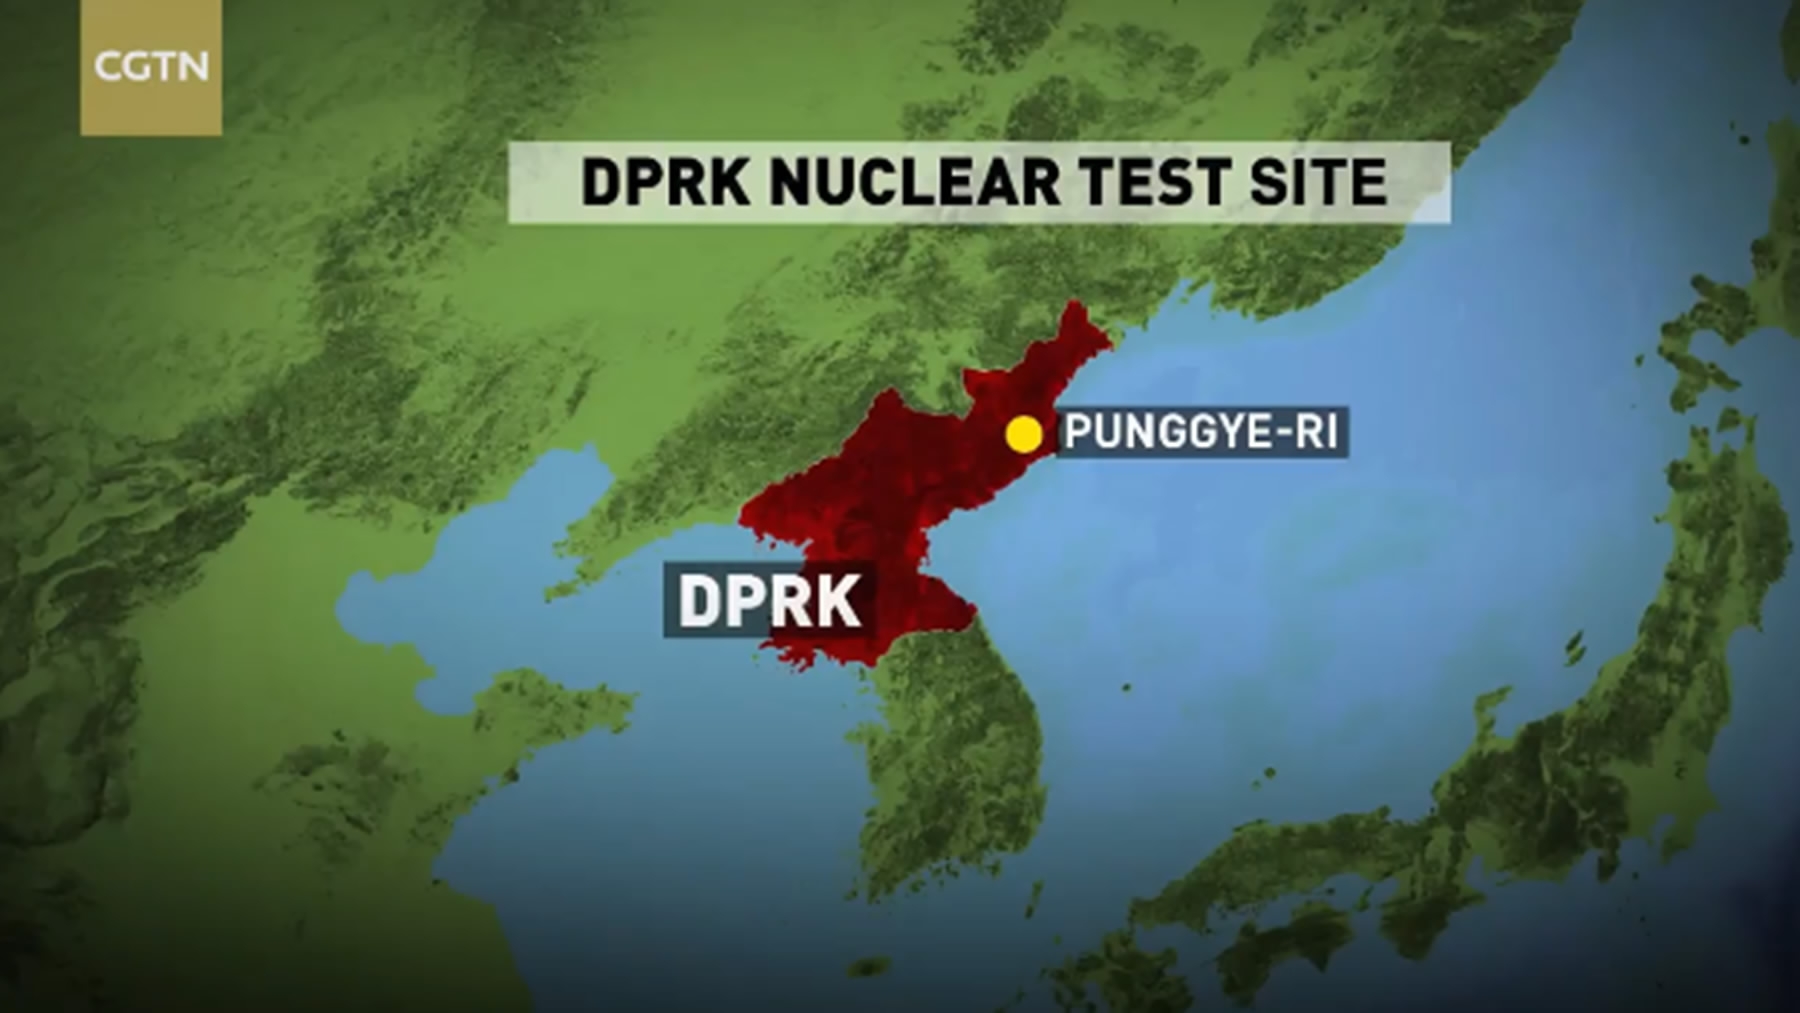 Foreign journalists fly to DPRK to watch closure of nuclear site from Beijing